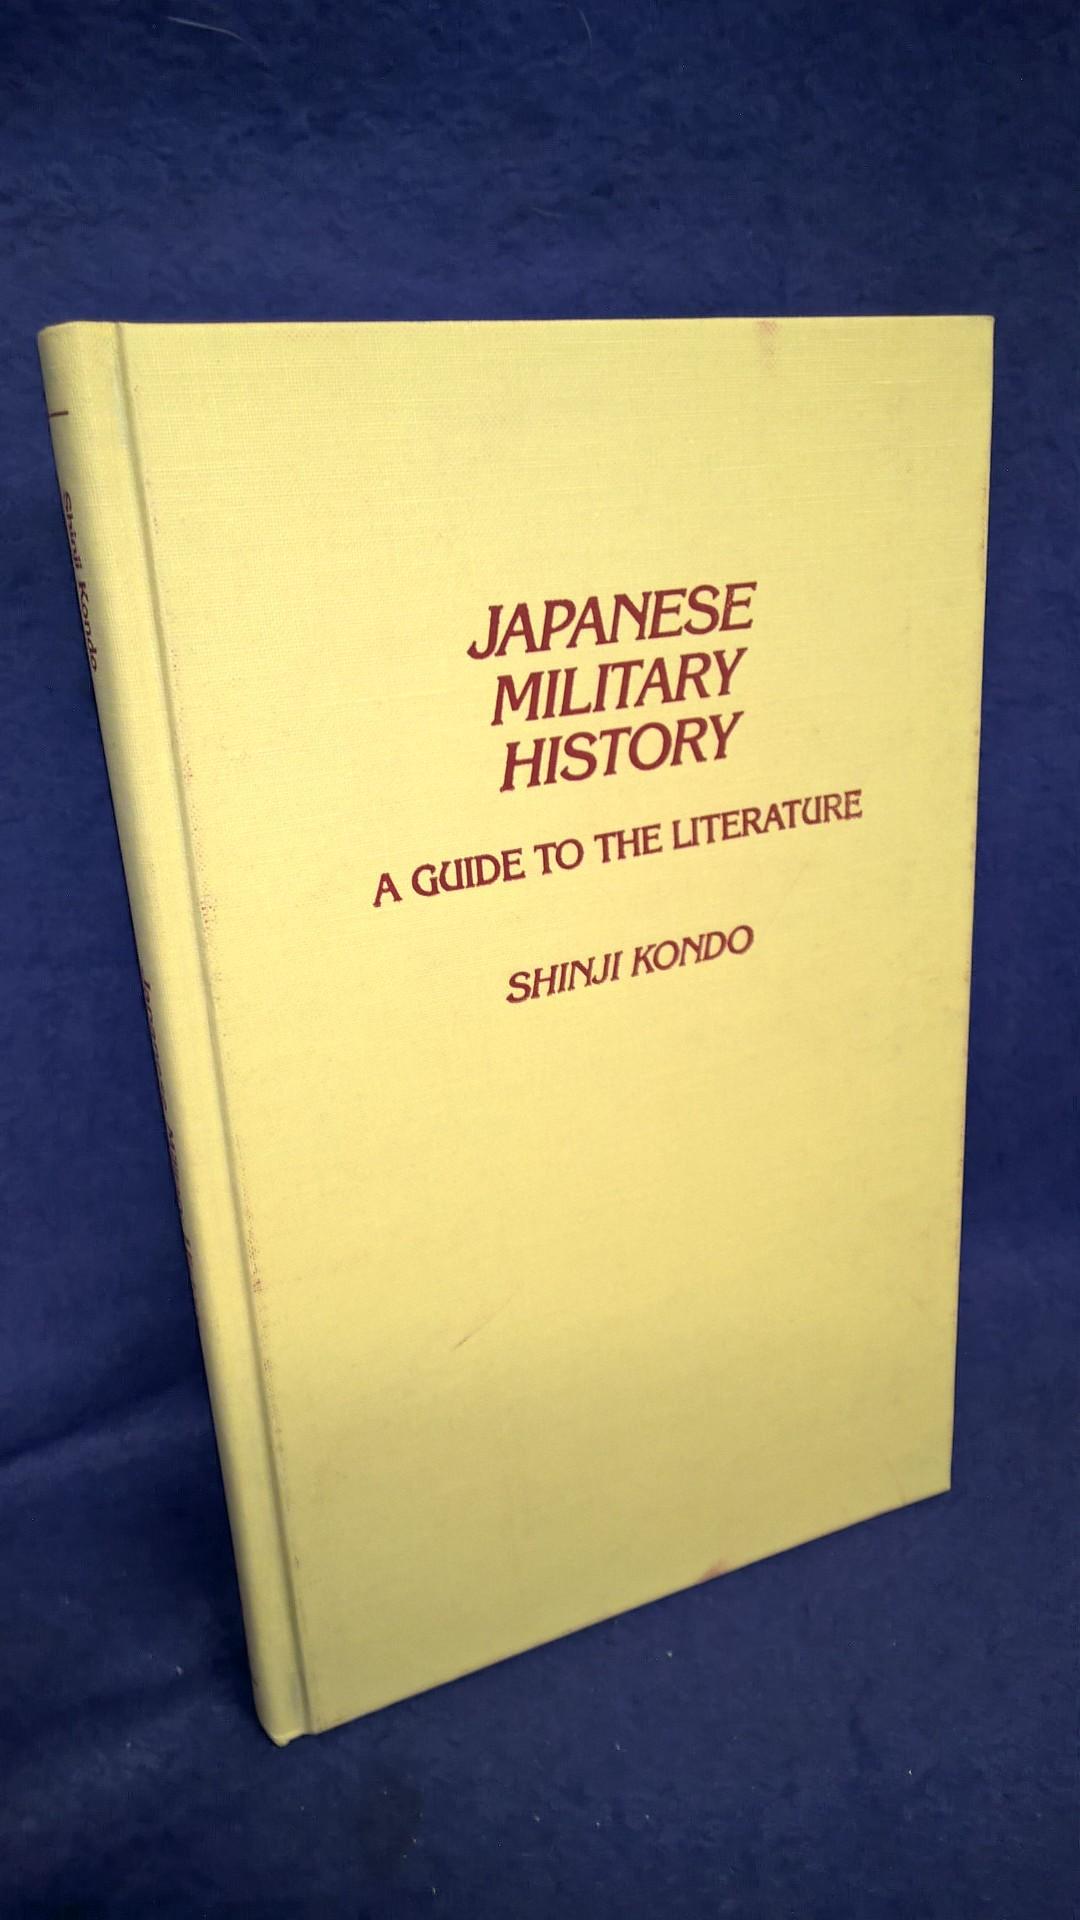 Japanese Military History. A Guide to the Literature.